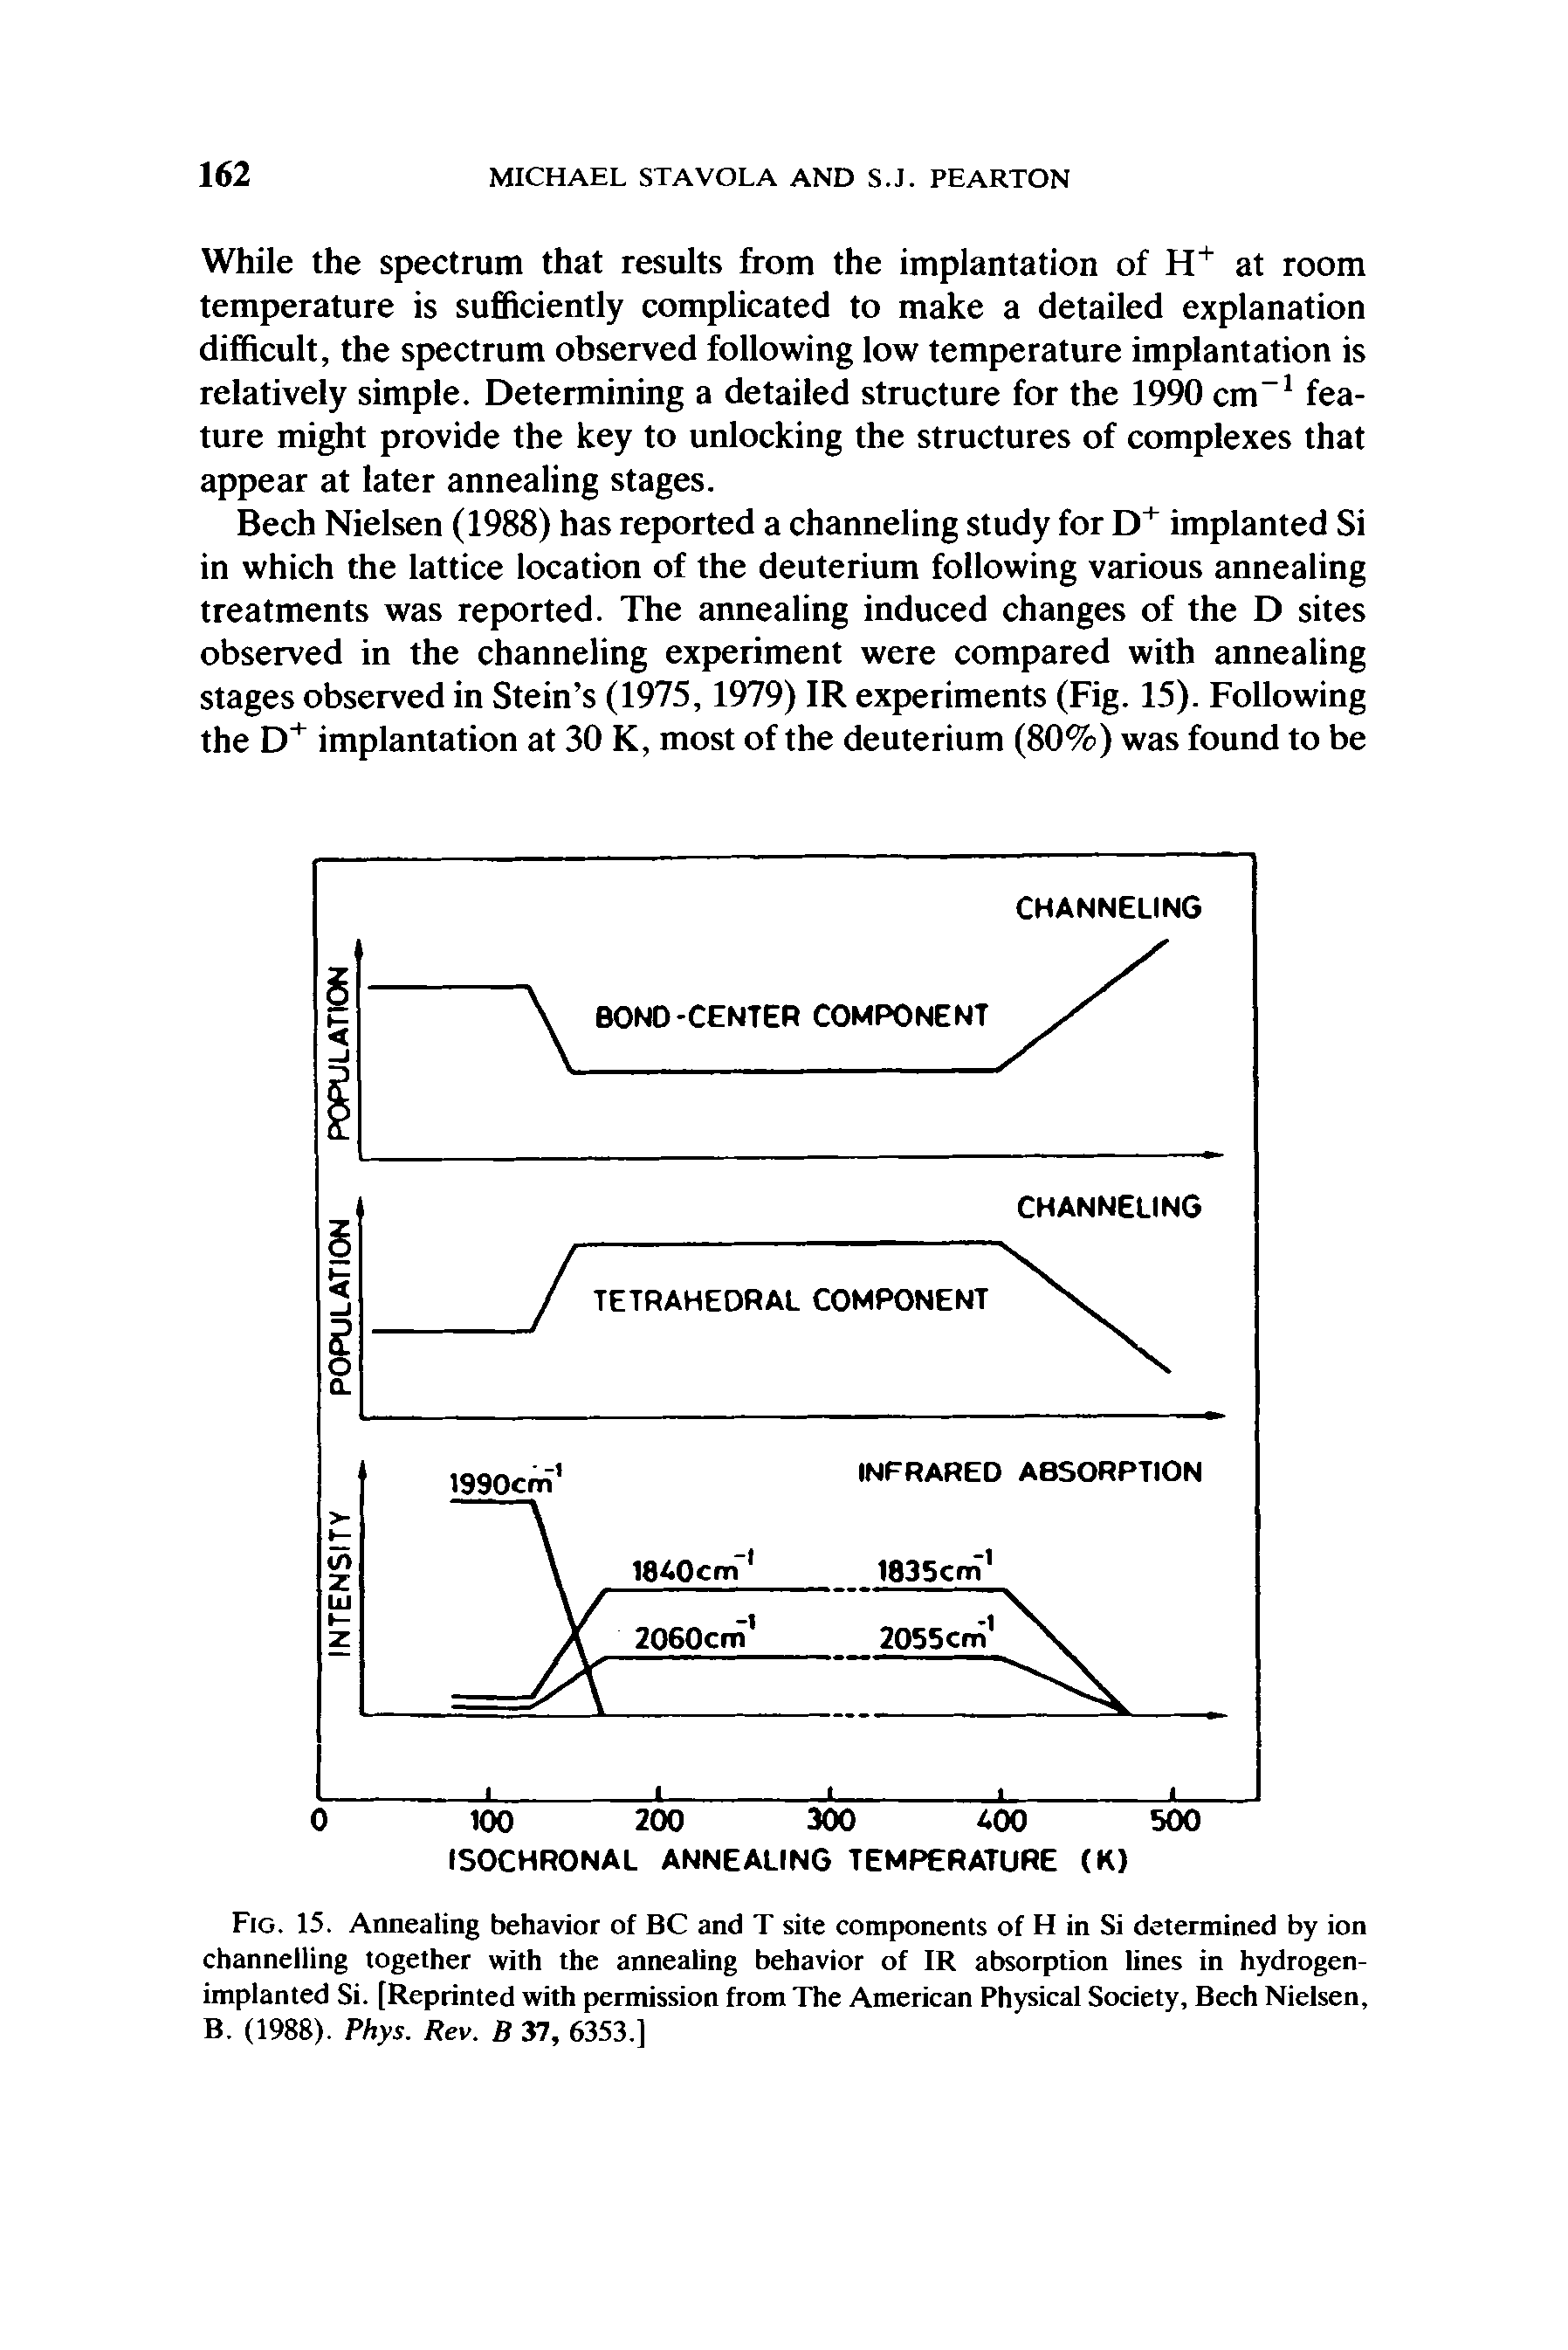 Fig. 15. Annealing behavior of BC and T site components of H in Si determined by ion channelling together with the annealing behavior of IR absorption lines in hydrogen-implanted Si. [Reprinted with permission from The American Physical Society, Bech Nielsen, B. (1988). Phys. Rev. B 37, 6353.]...